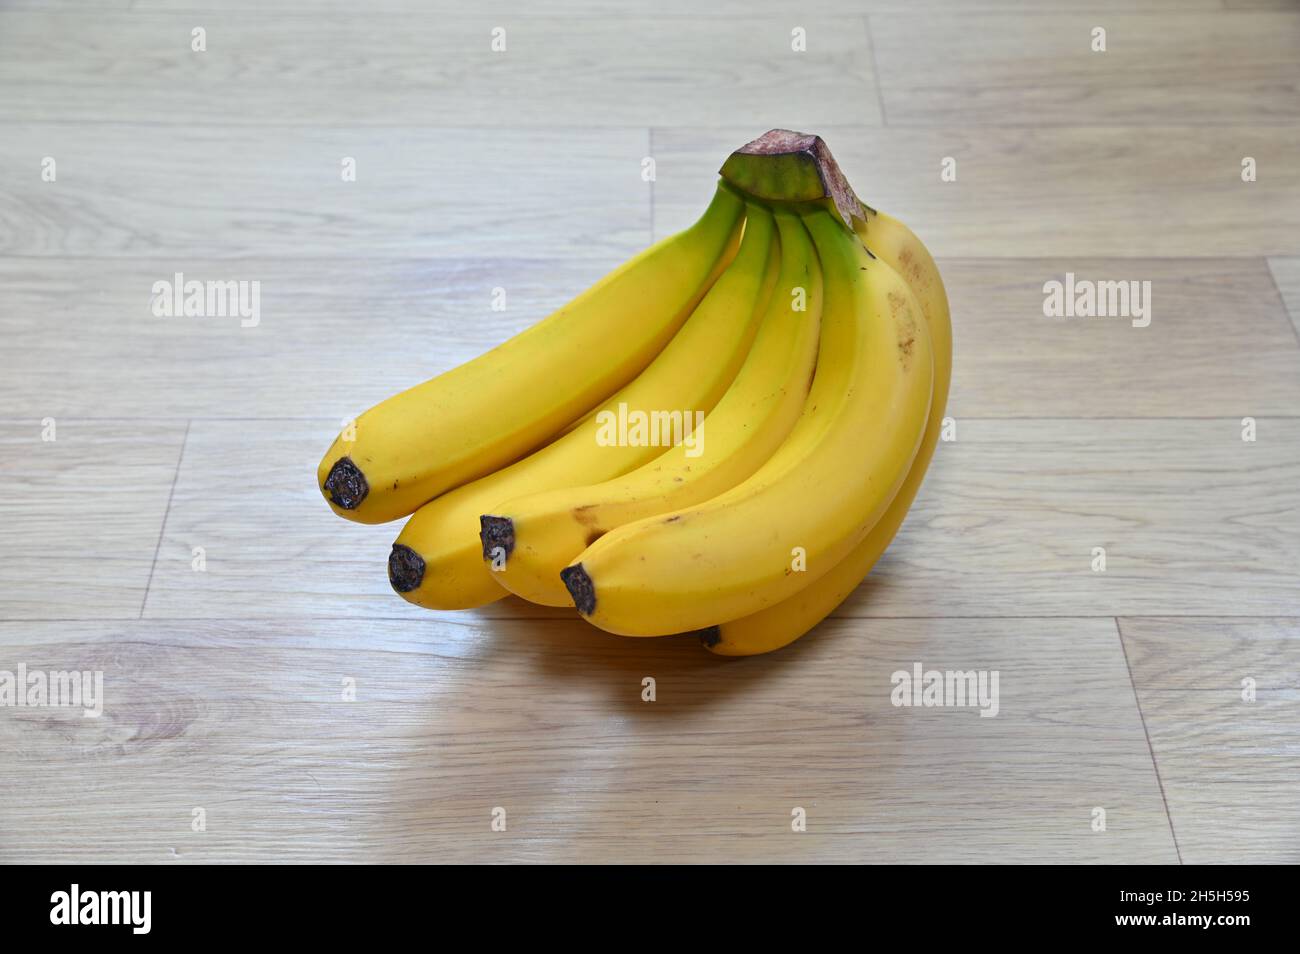 There is a banana that looks delicious. Looking at the yellow banana makes my mouth water. Stock Photo